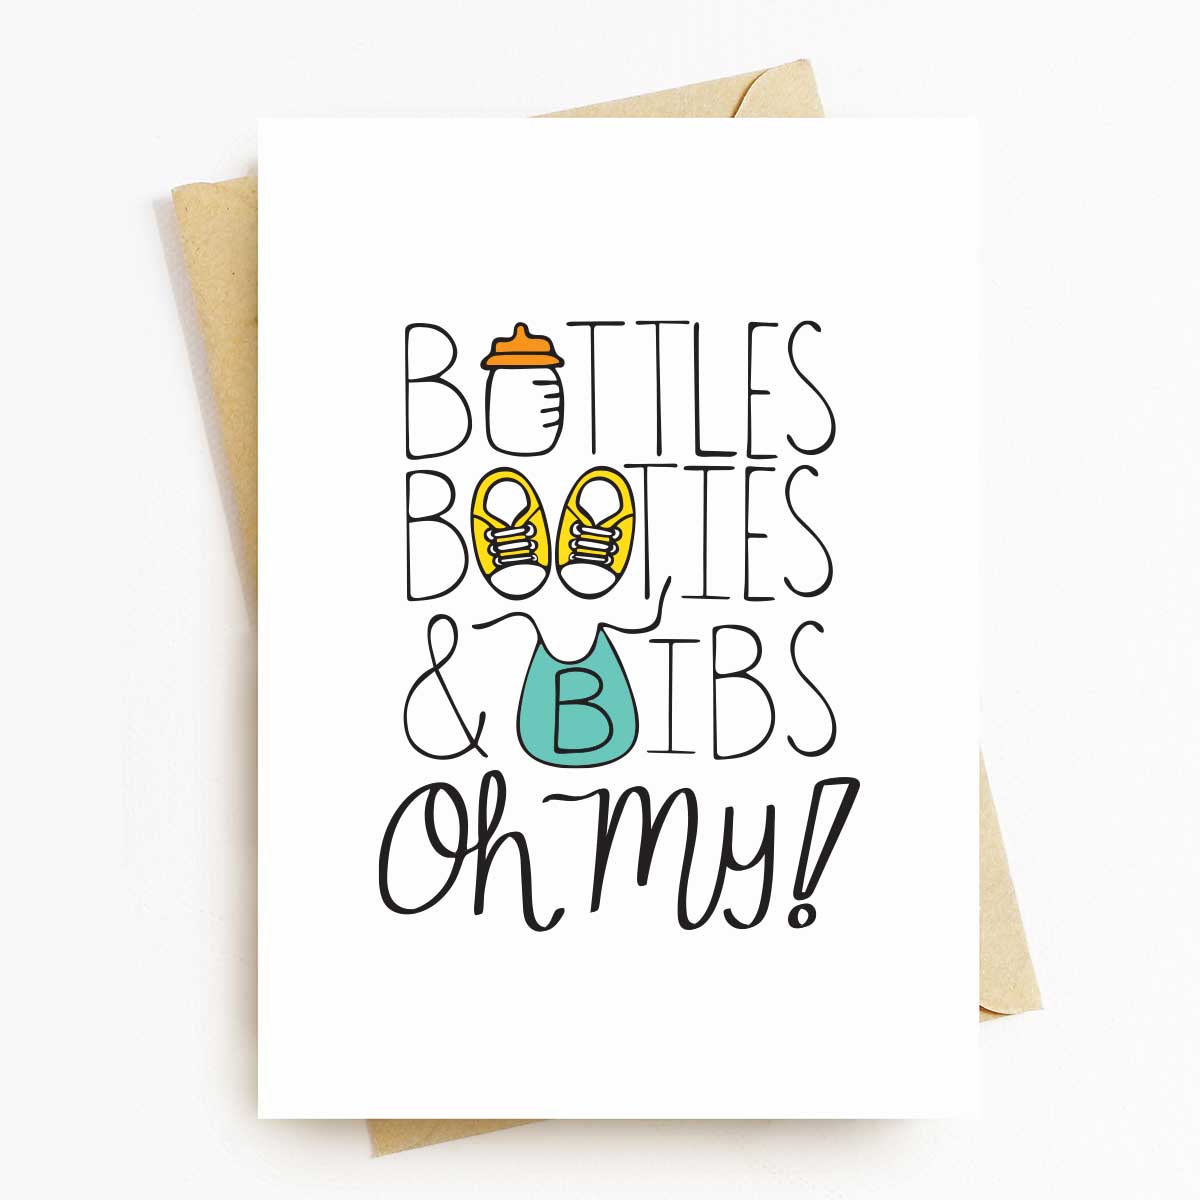 Bottles and Booties Baby Shower Greeting Card